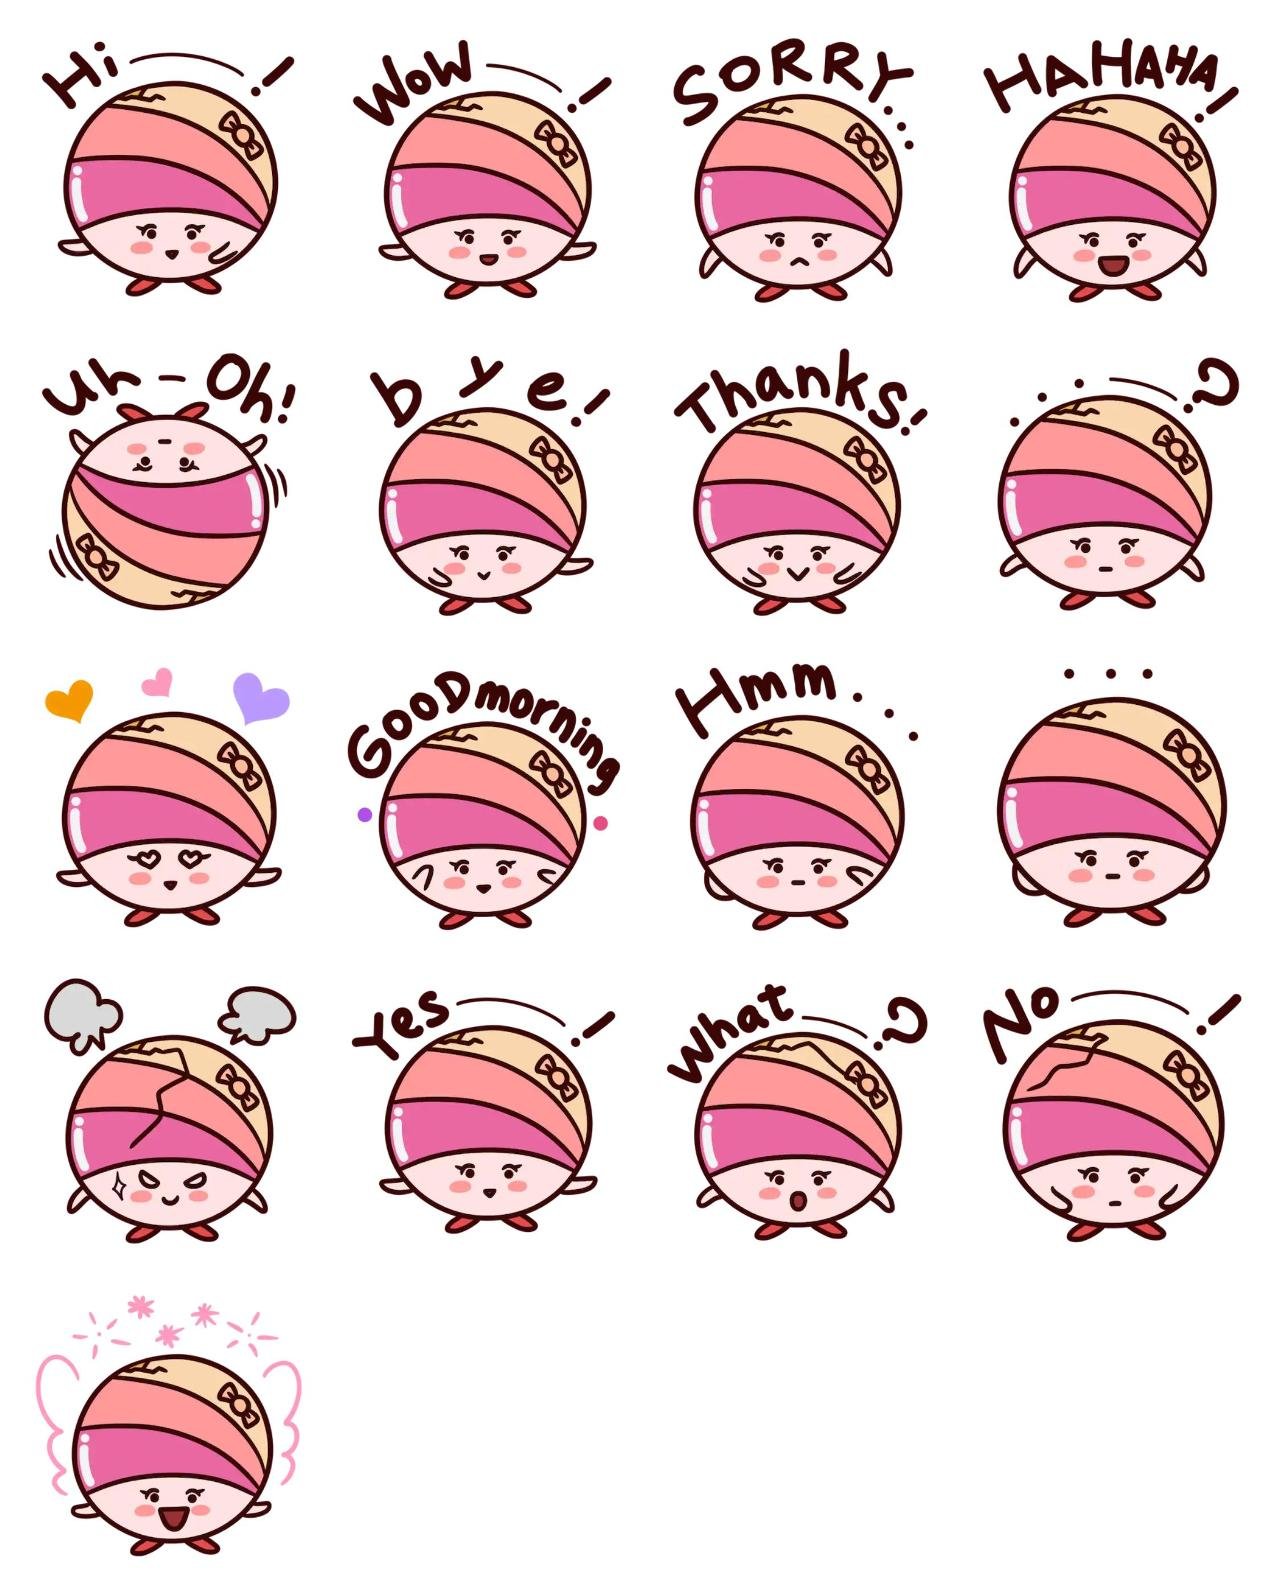 Glass Bead Girl 1 Animation/Cartoon,Etc. sticker pack for Whatsapp, Telegram, Signal, and others chatting and message apps